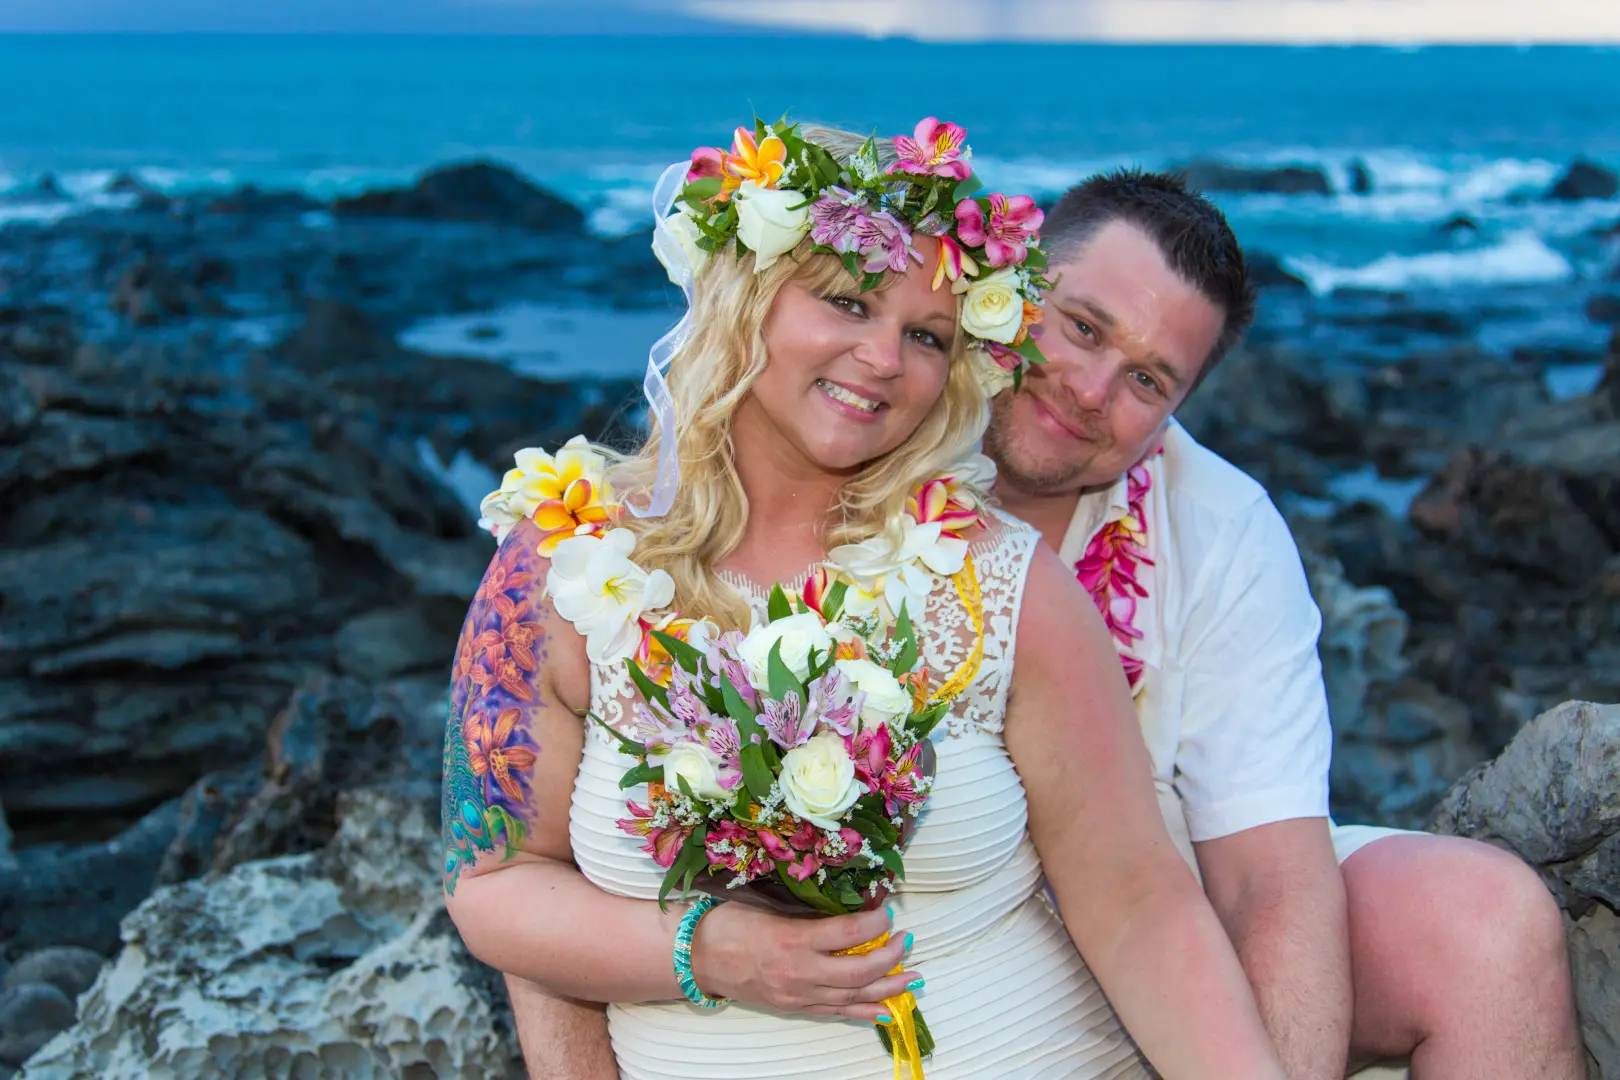 A Girl Wearing Flower Crown and Necklace Cute Couple Photo